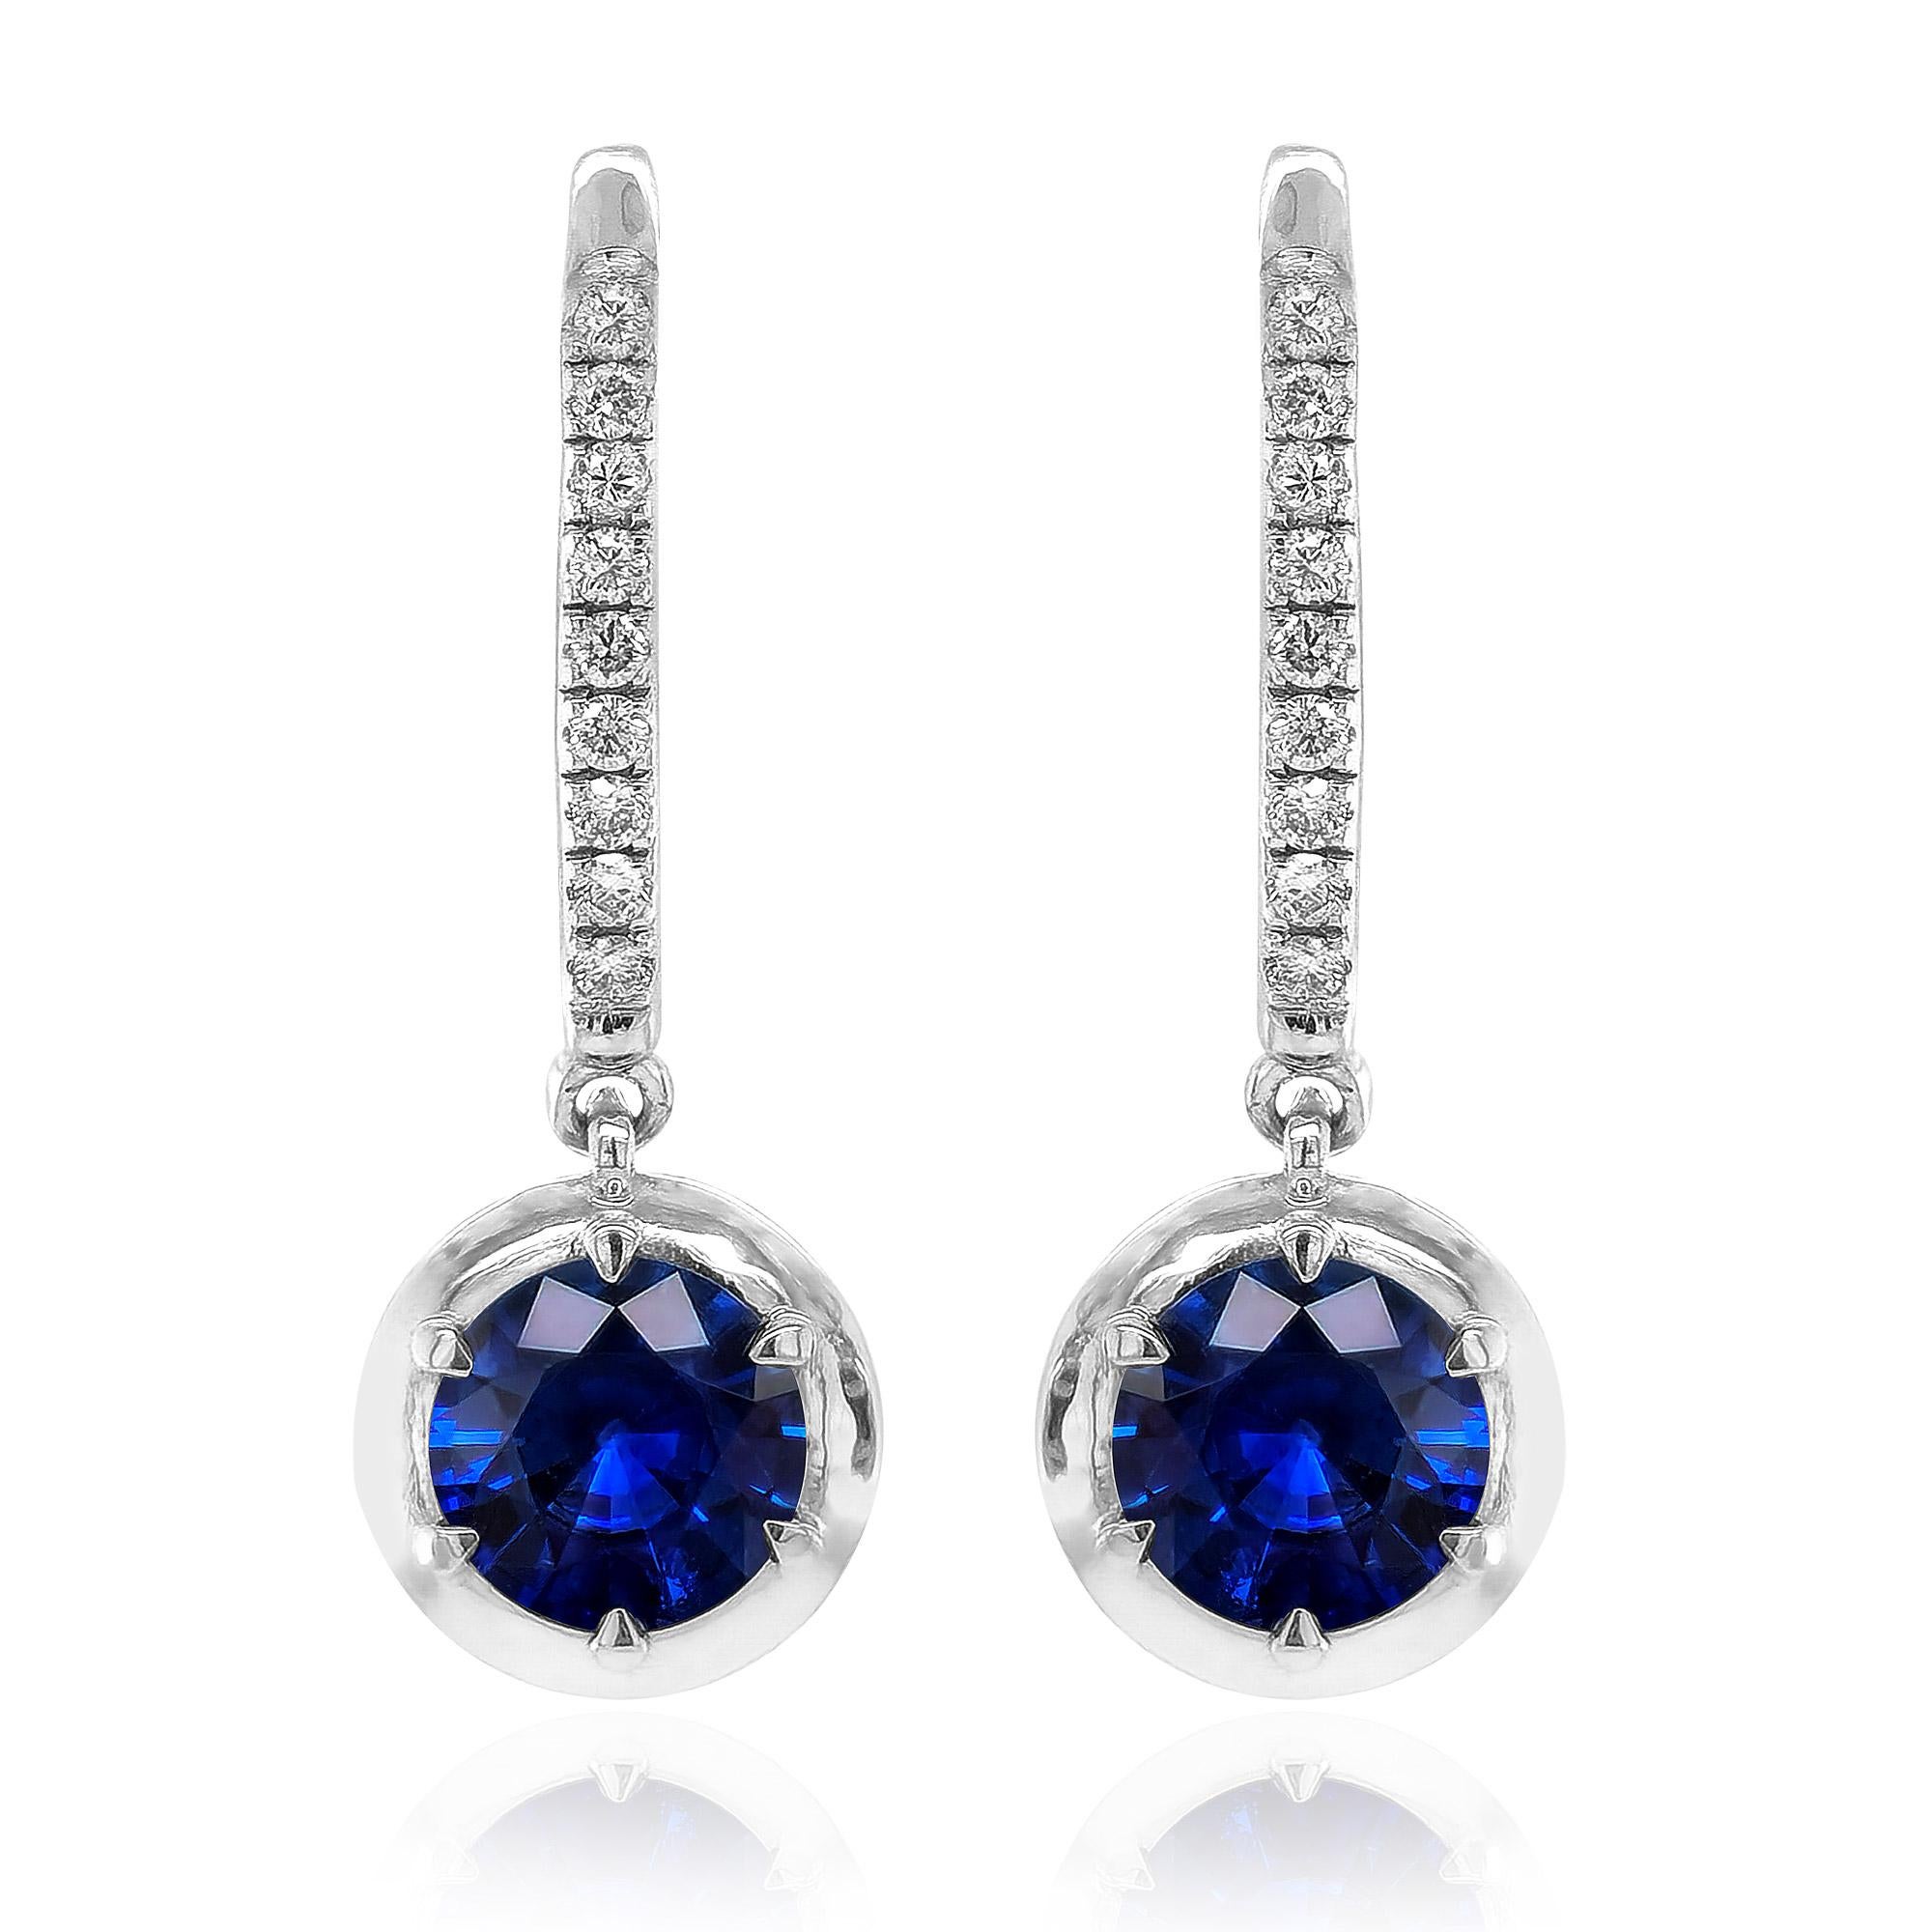 Women's Natural Blue Sapphires 2.60 Carats set in 14K White Gold Earrings with Diamonds For Sale